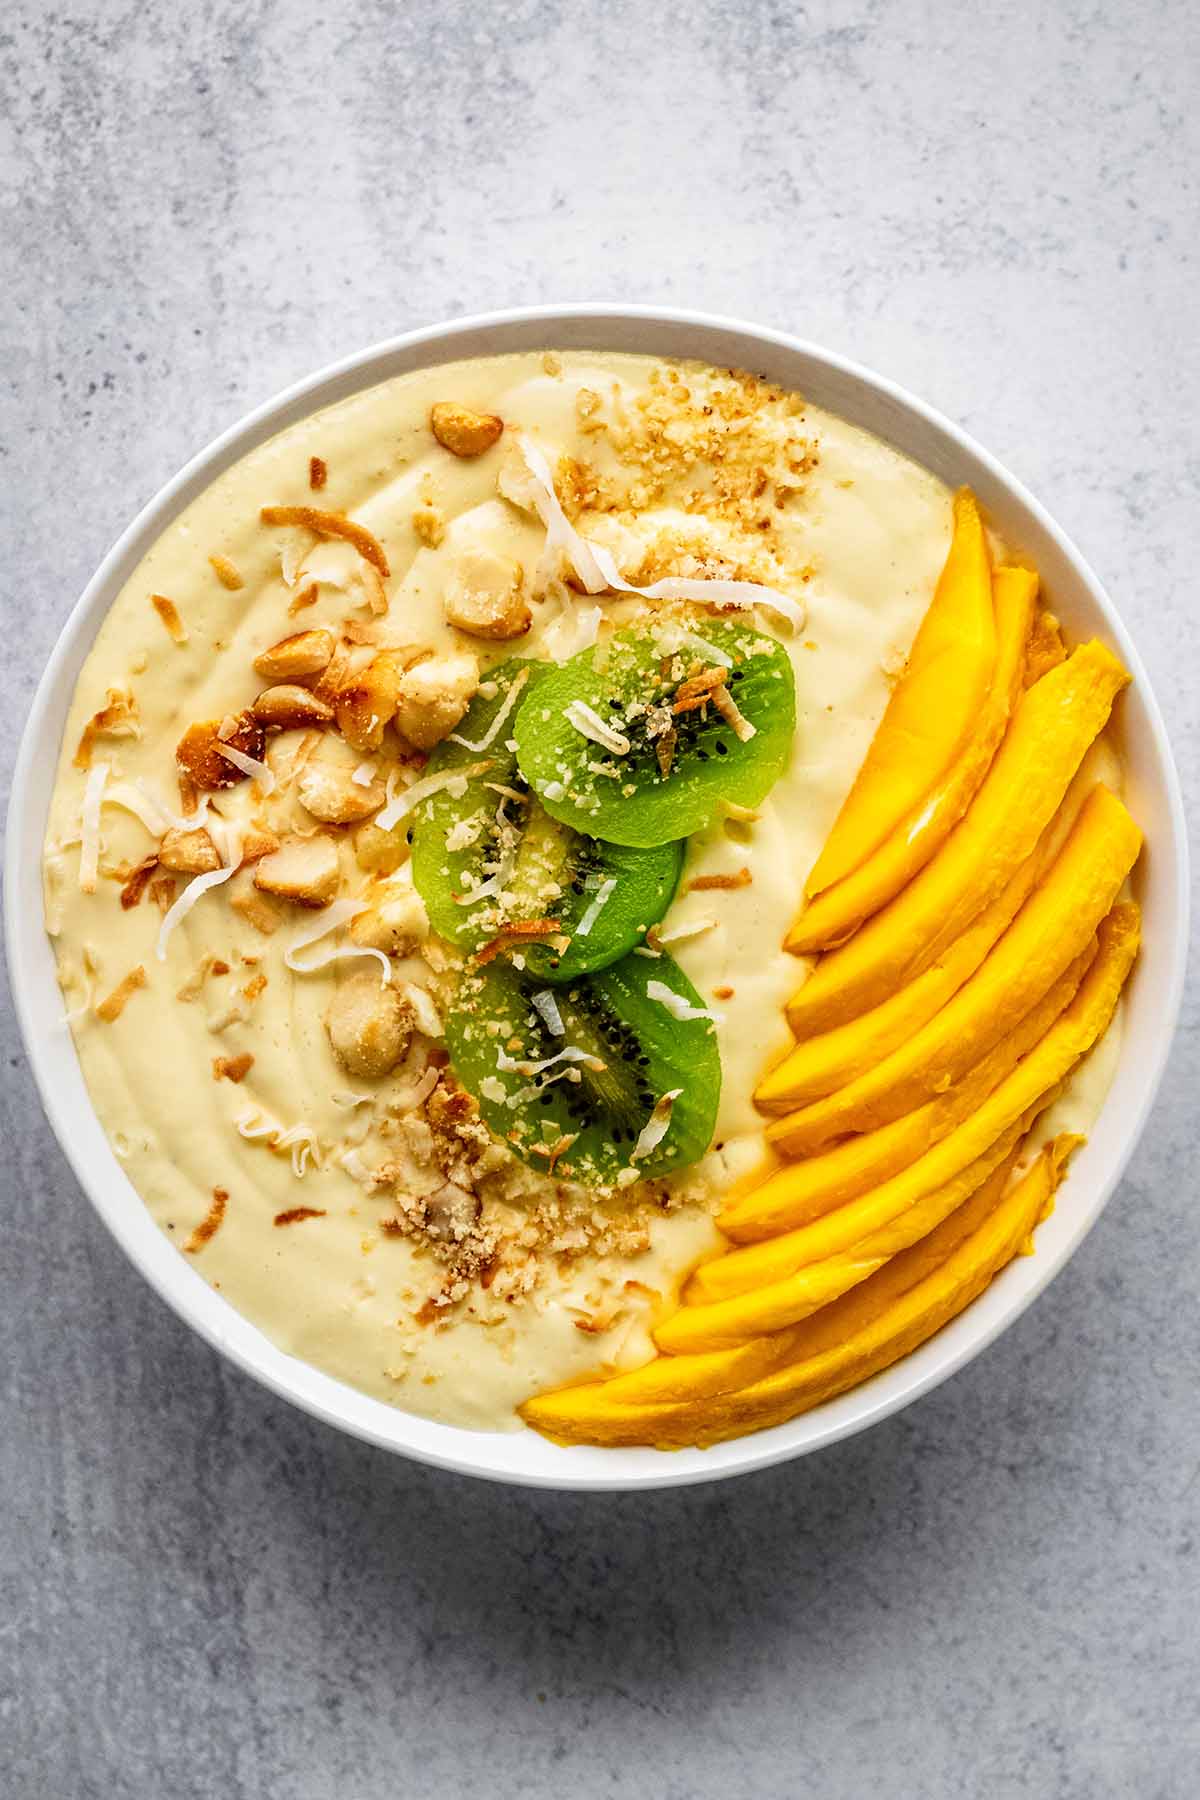 Mango smoothie bowl in a white bowl topped with chopped macadamia nuts, sliced kiwi, fresh mango slices, and toasted coconut flakes on a concrete countertop.